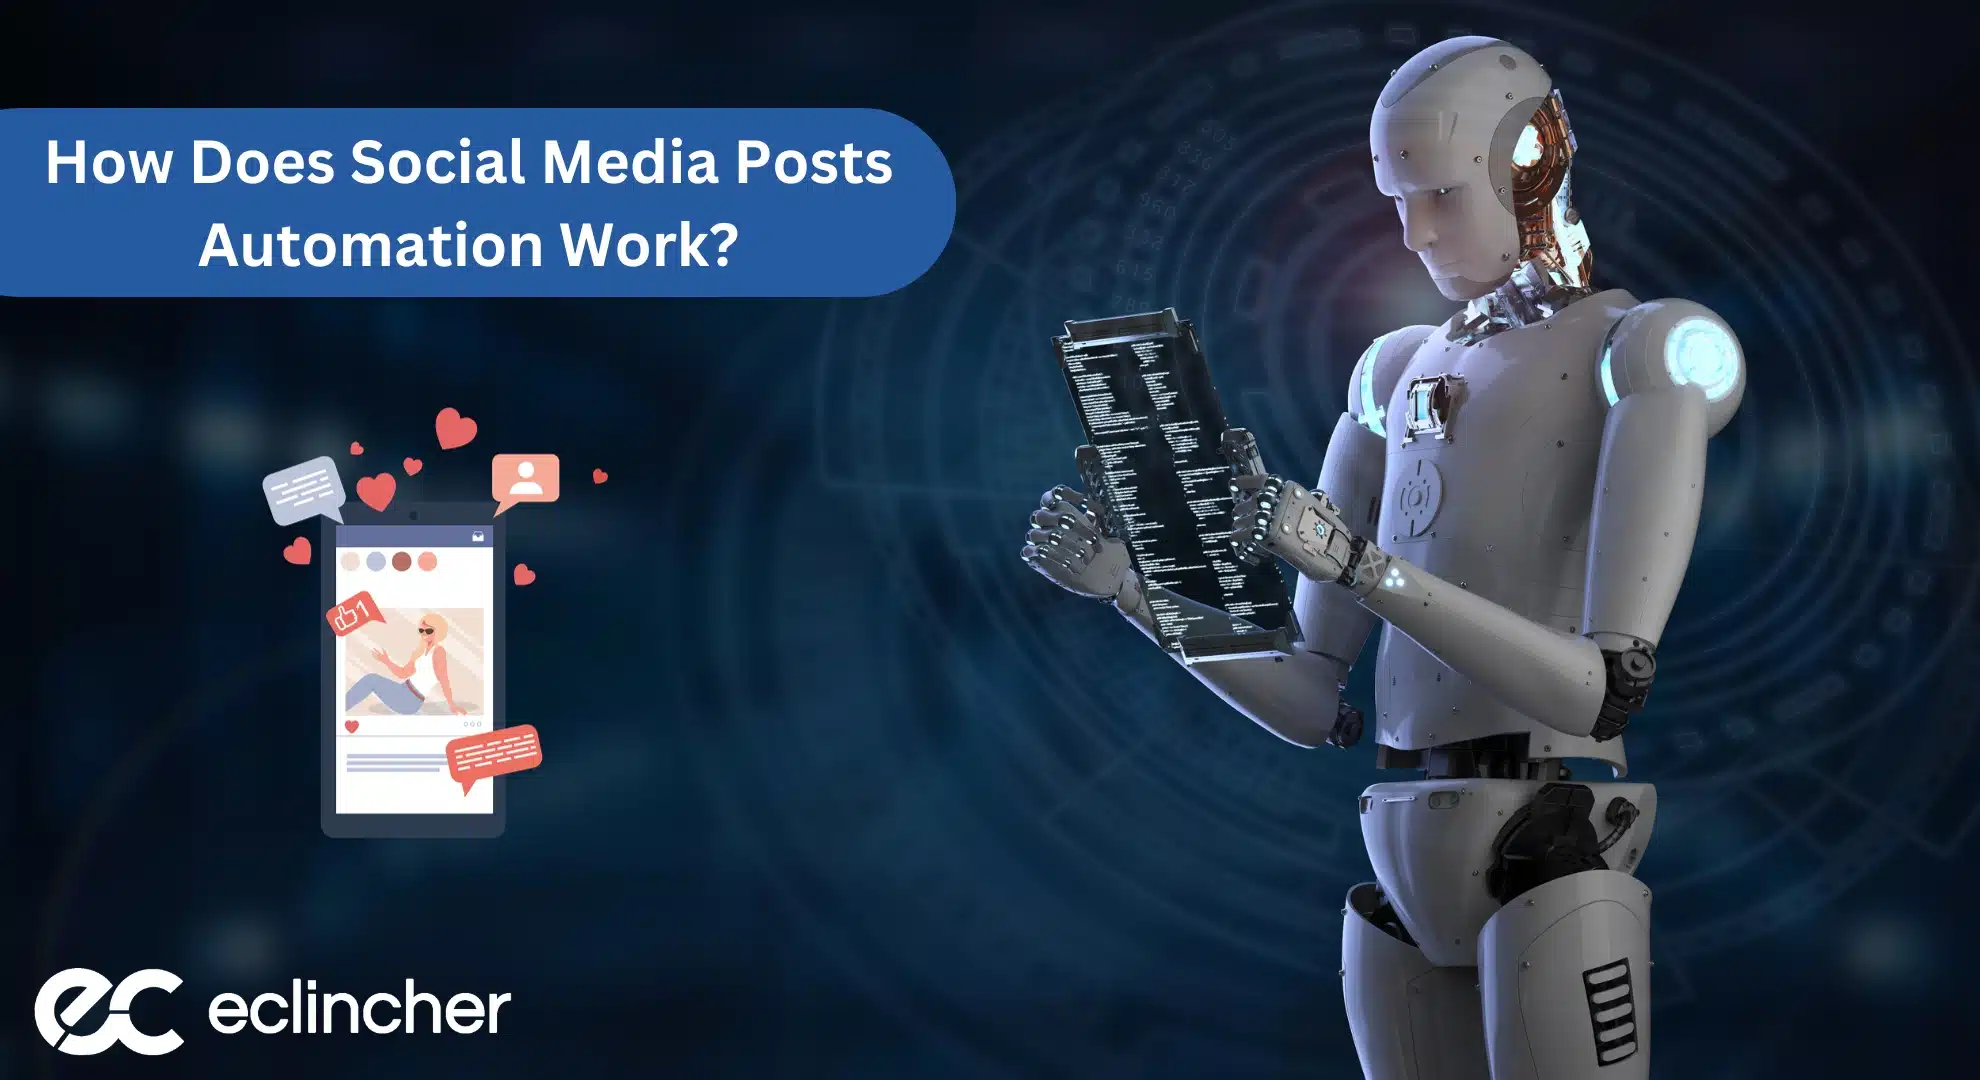 How Do Social Media Posts Automation Works